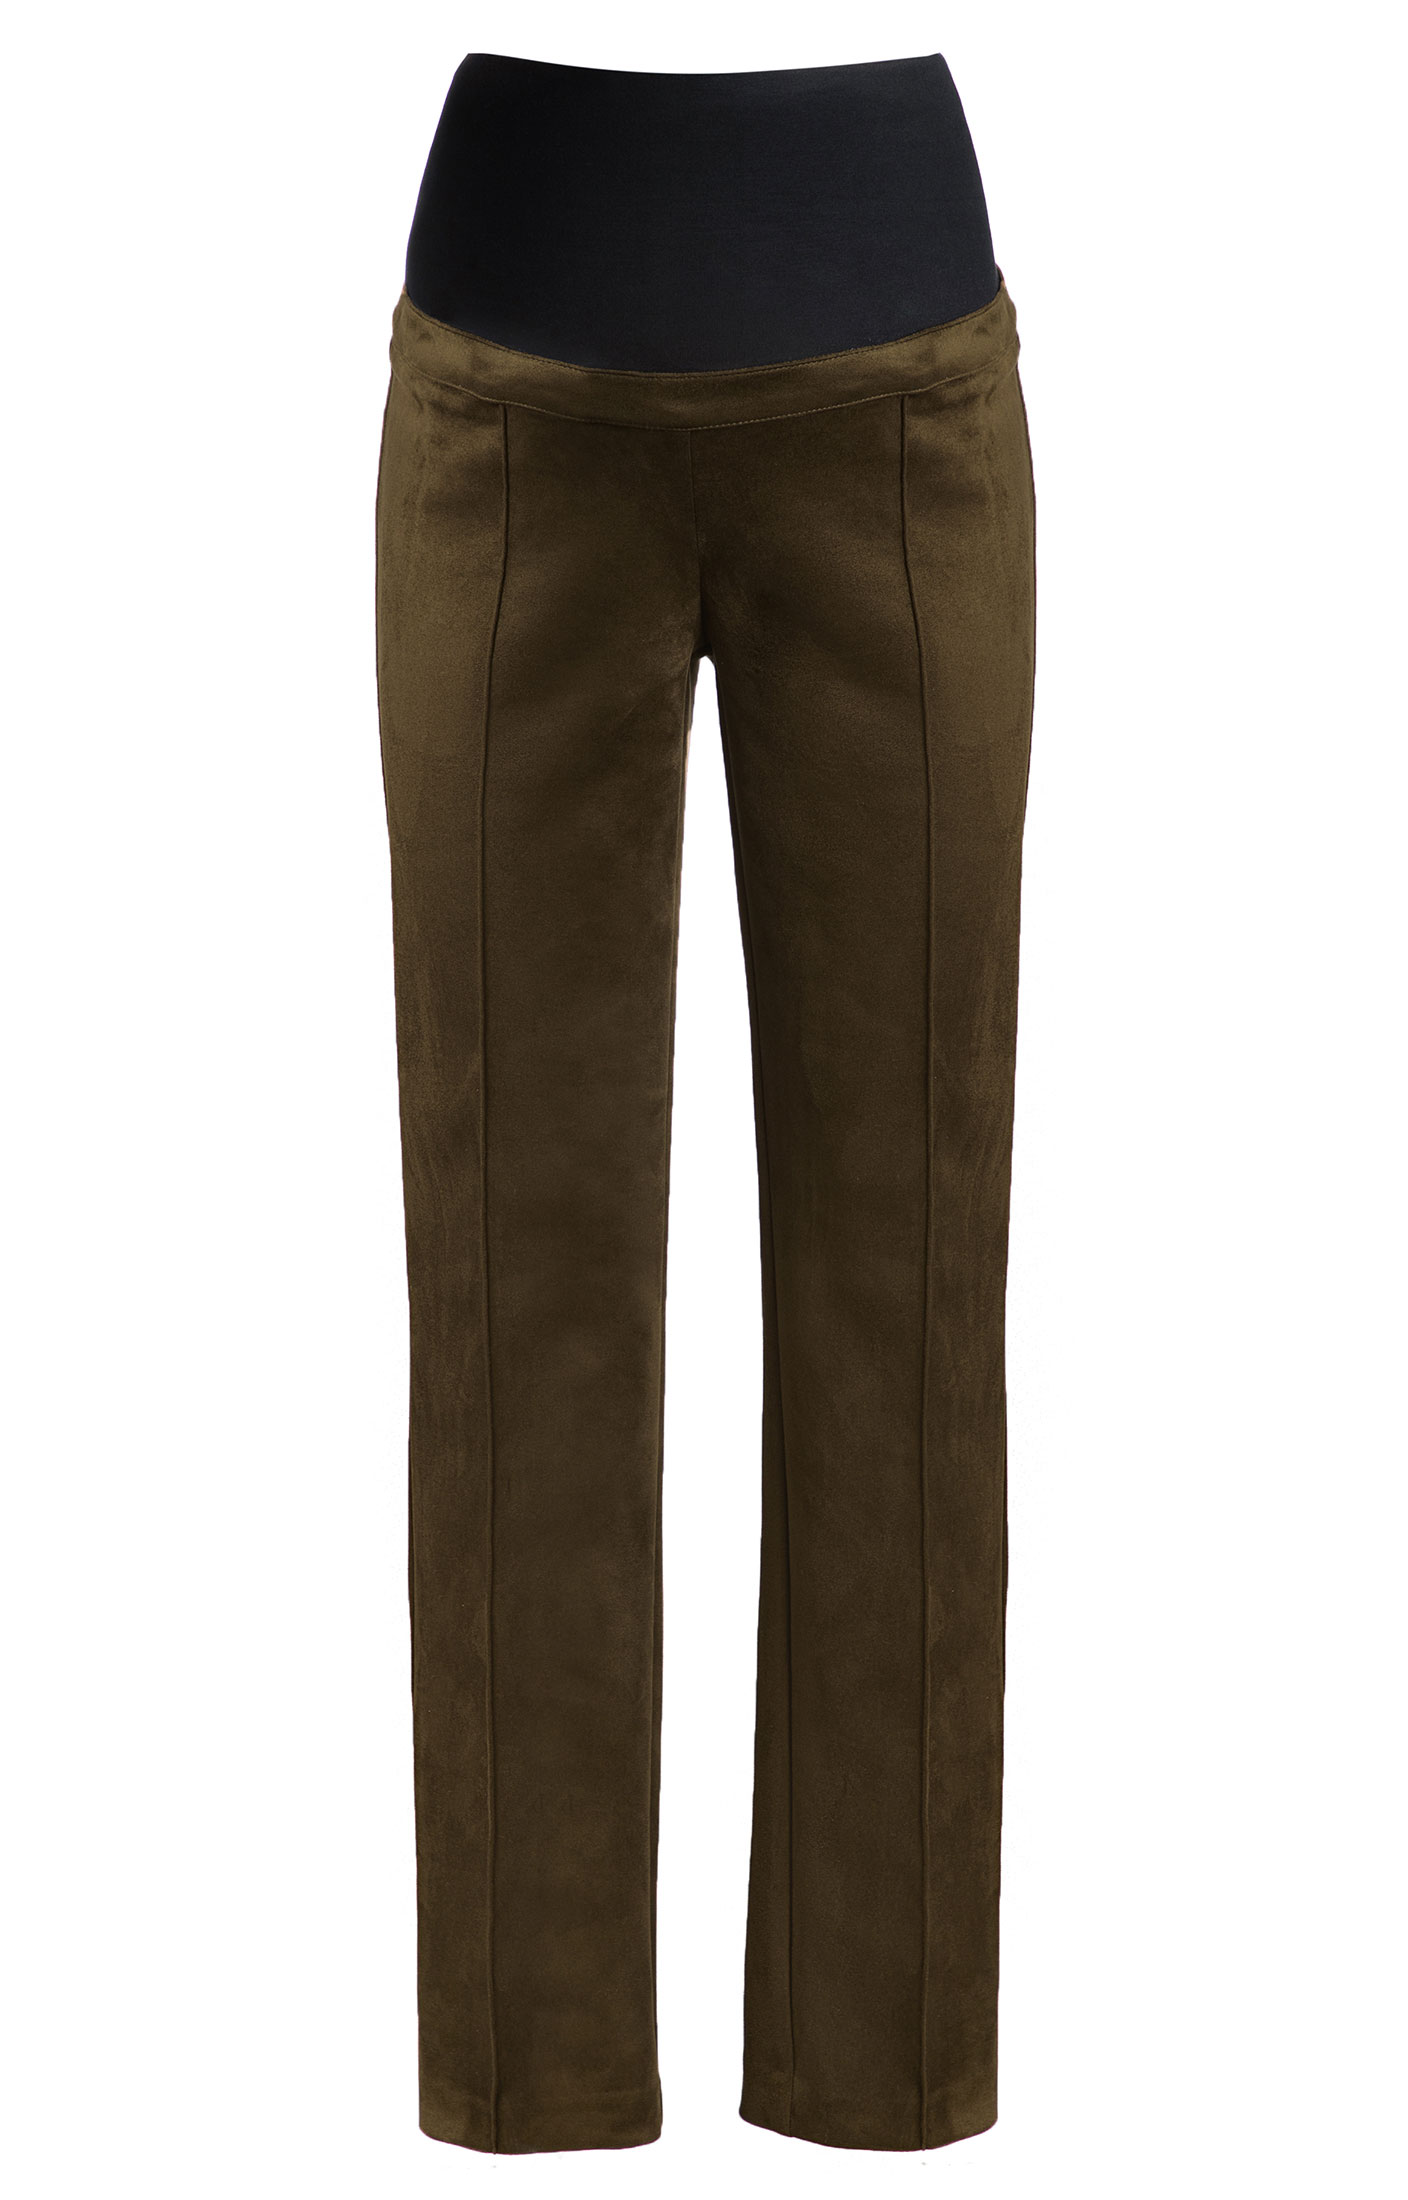 MATERNITY - CARGO COTTON DRILL PANT - WPL081 | TRADIES WORKWEAR SHOP